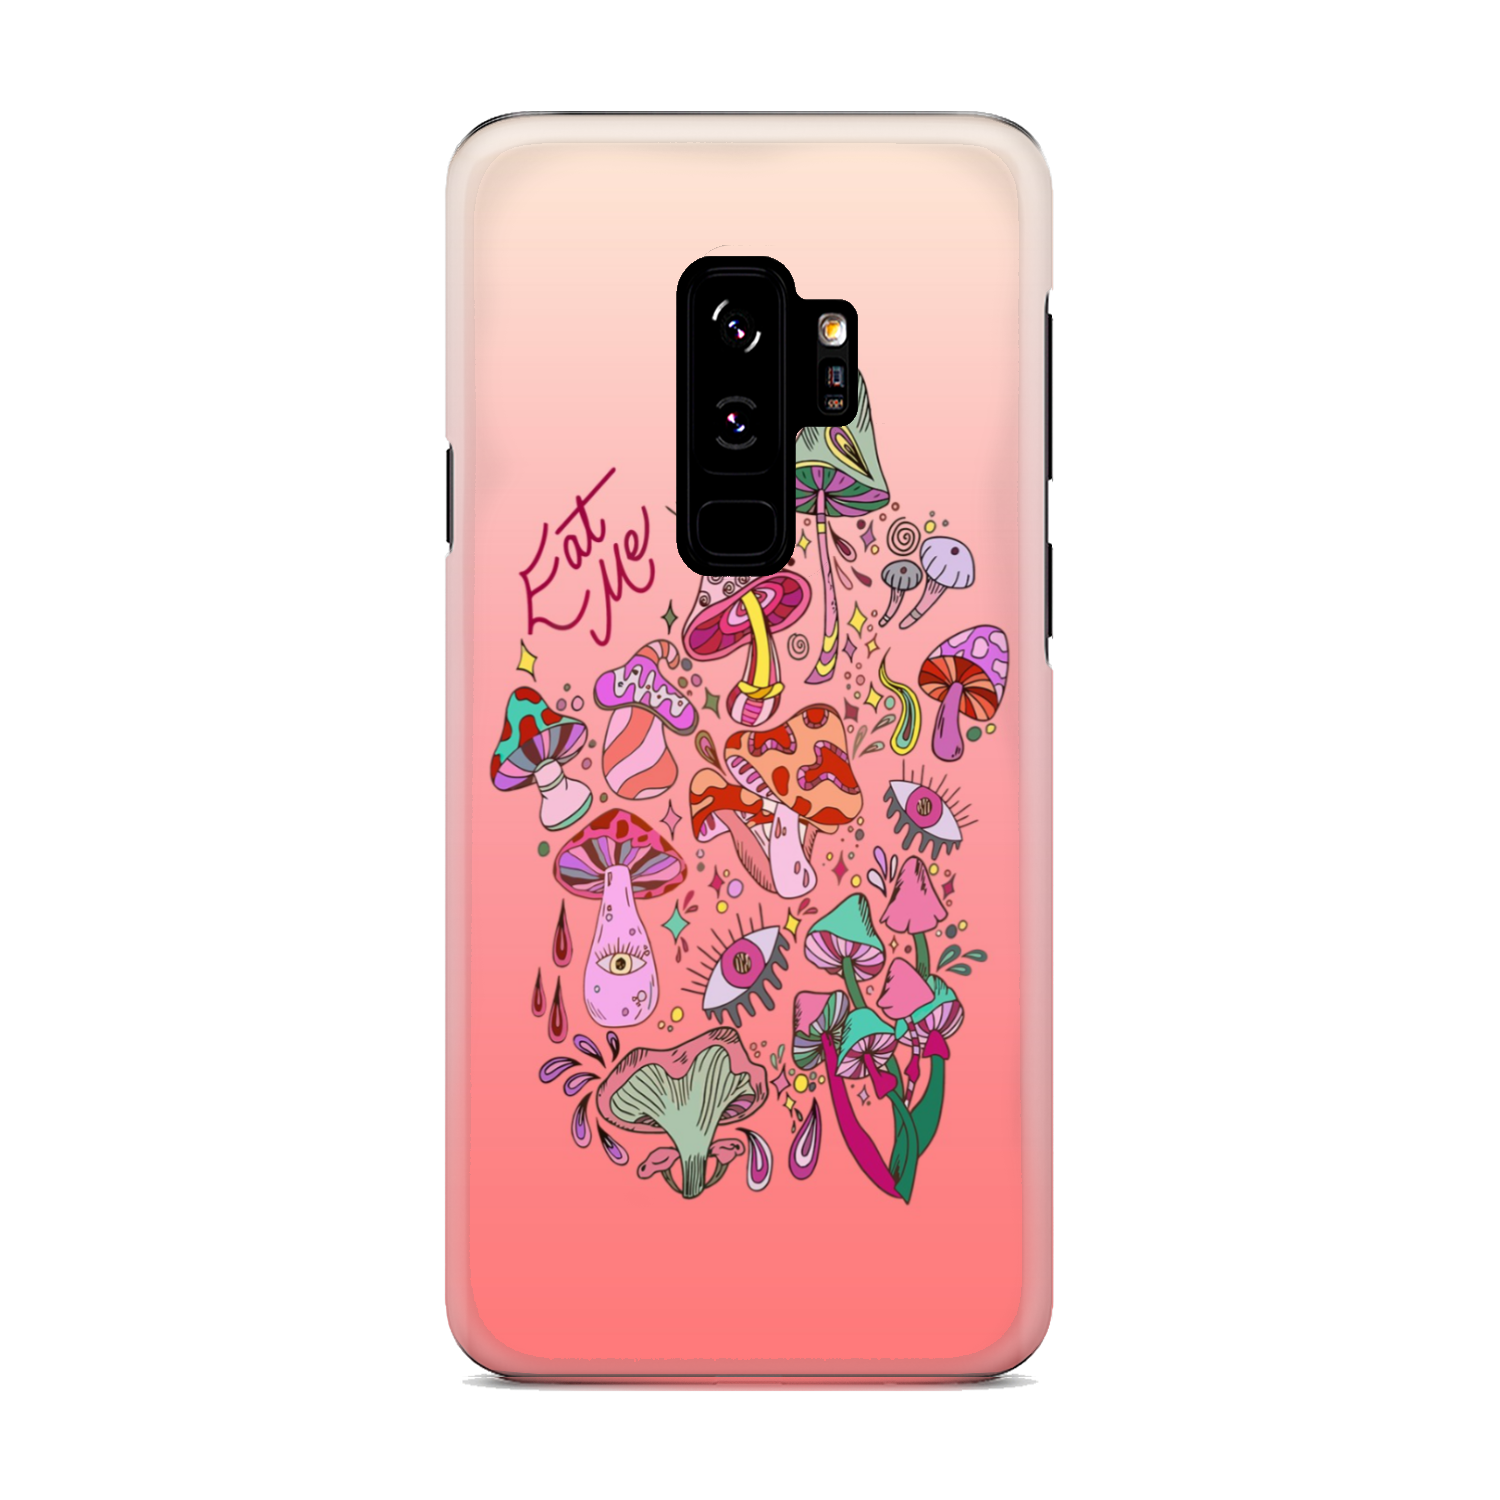 EAT ME PHONE CASE - TY0302234